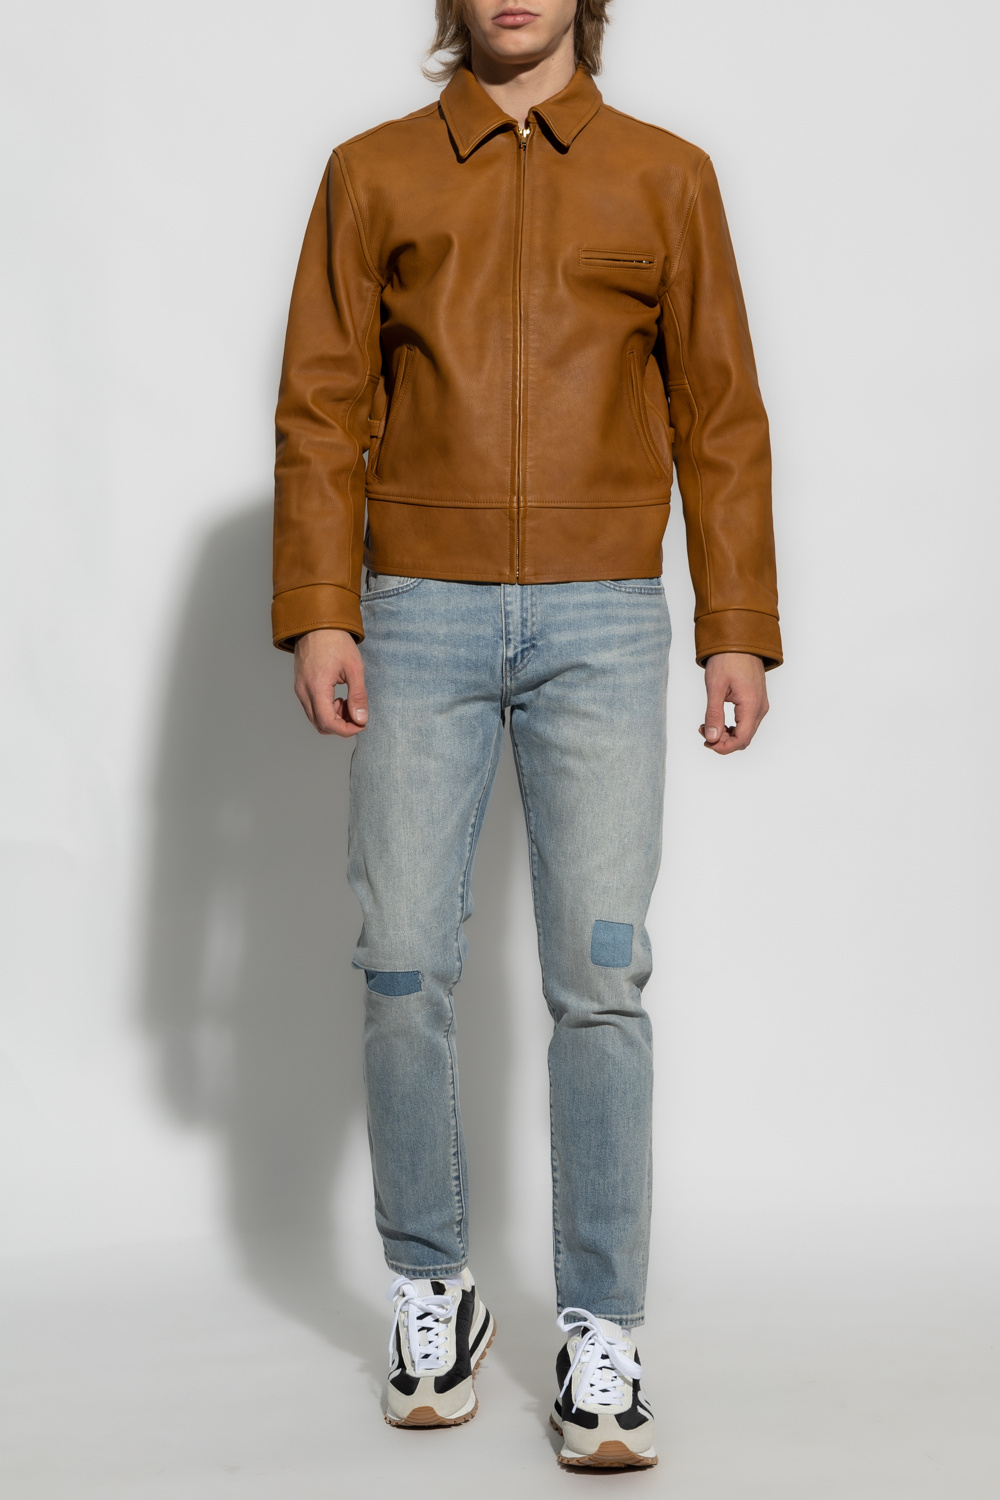 Levi's Leather jacket 'Vintage Clothing®' collection, Men's Clothing